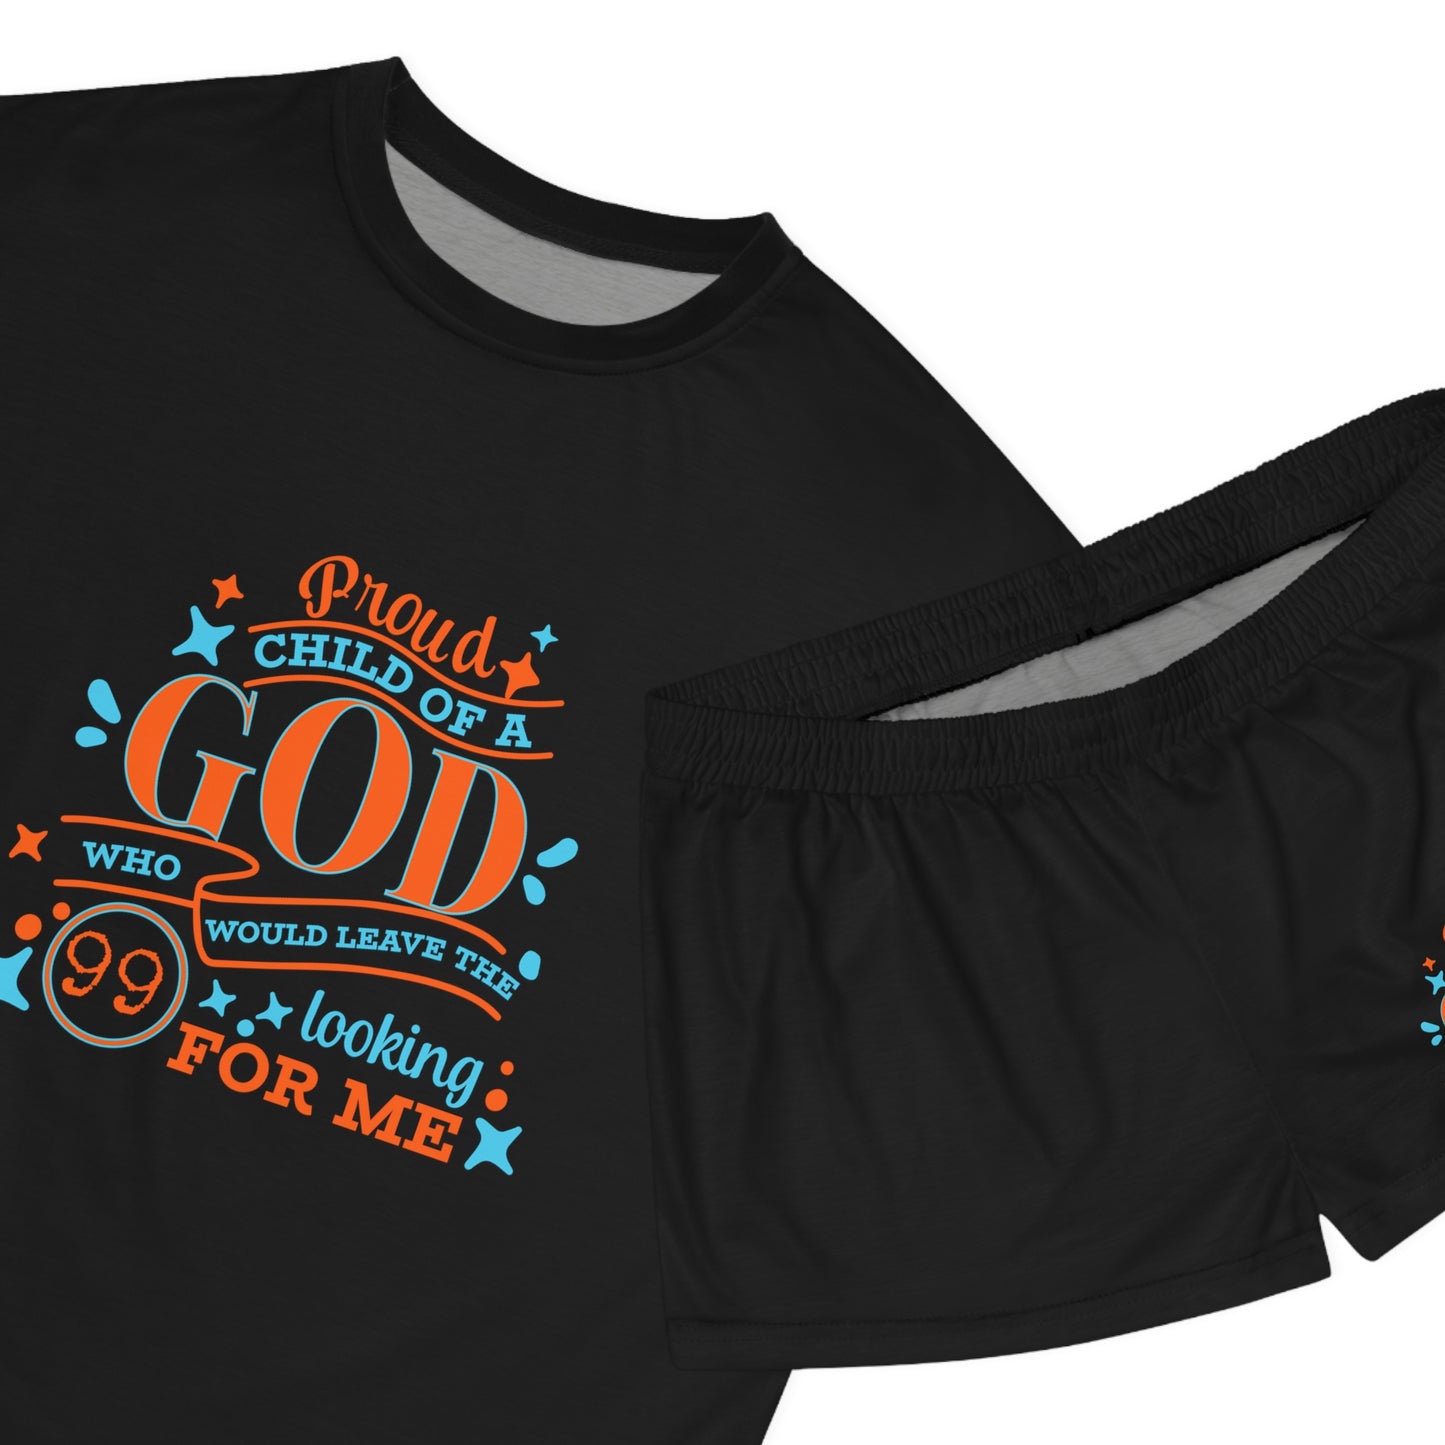 Proud Child Of A God Who Would Leave The 99 Looking For Me Women's Christian Short Pajama Set Printify